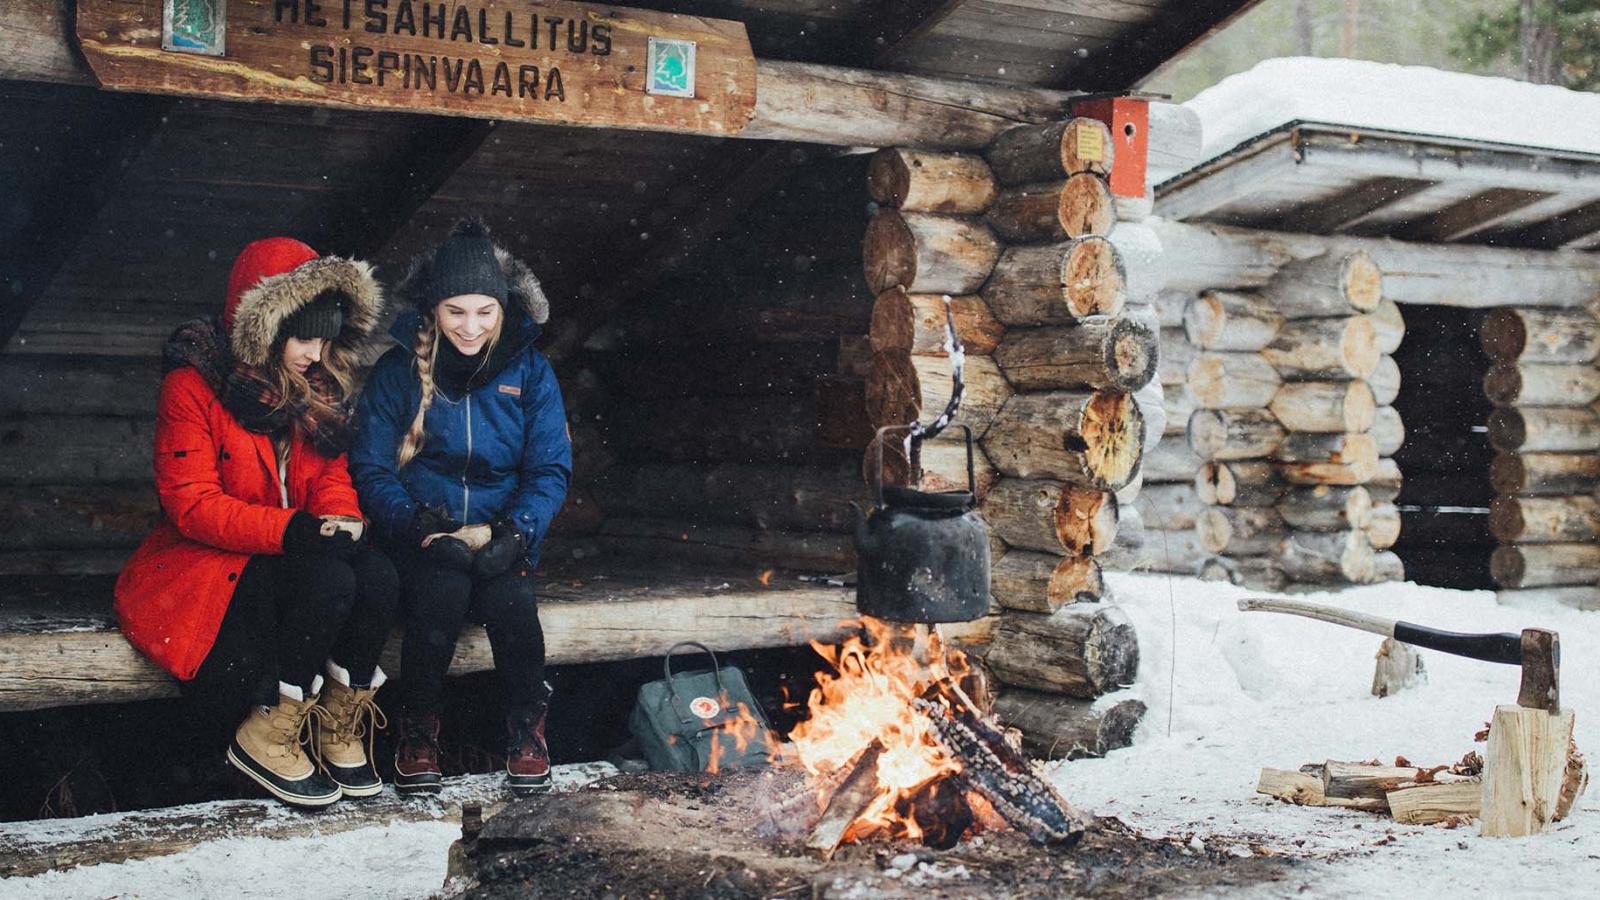 Why you should take your family to Finnish Lapland